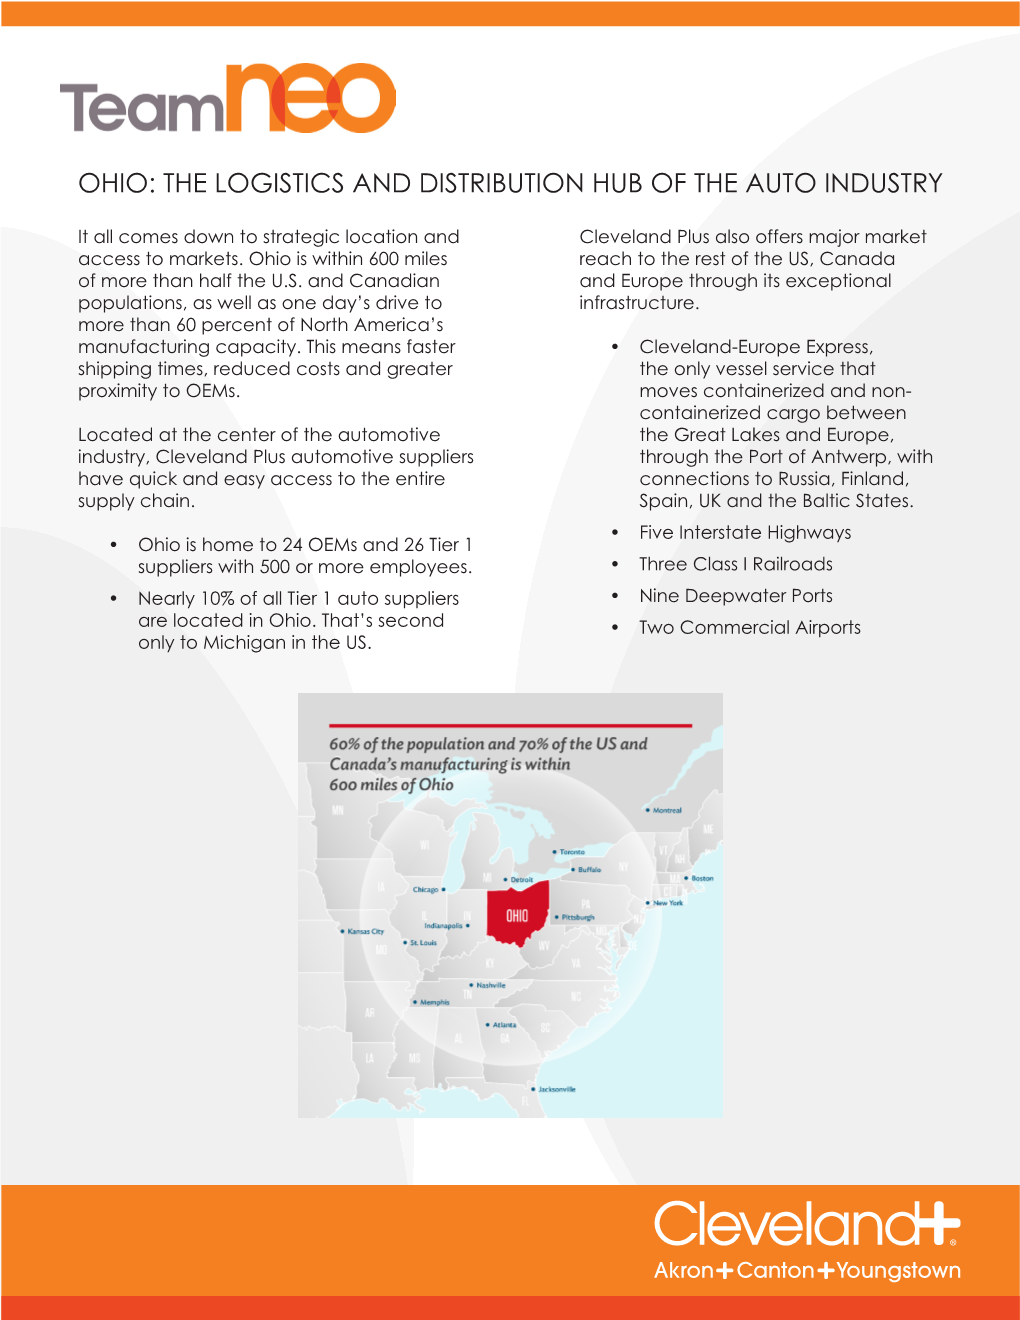 Ohio: the Logistics and Distribution Hub of the Auto Industry